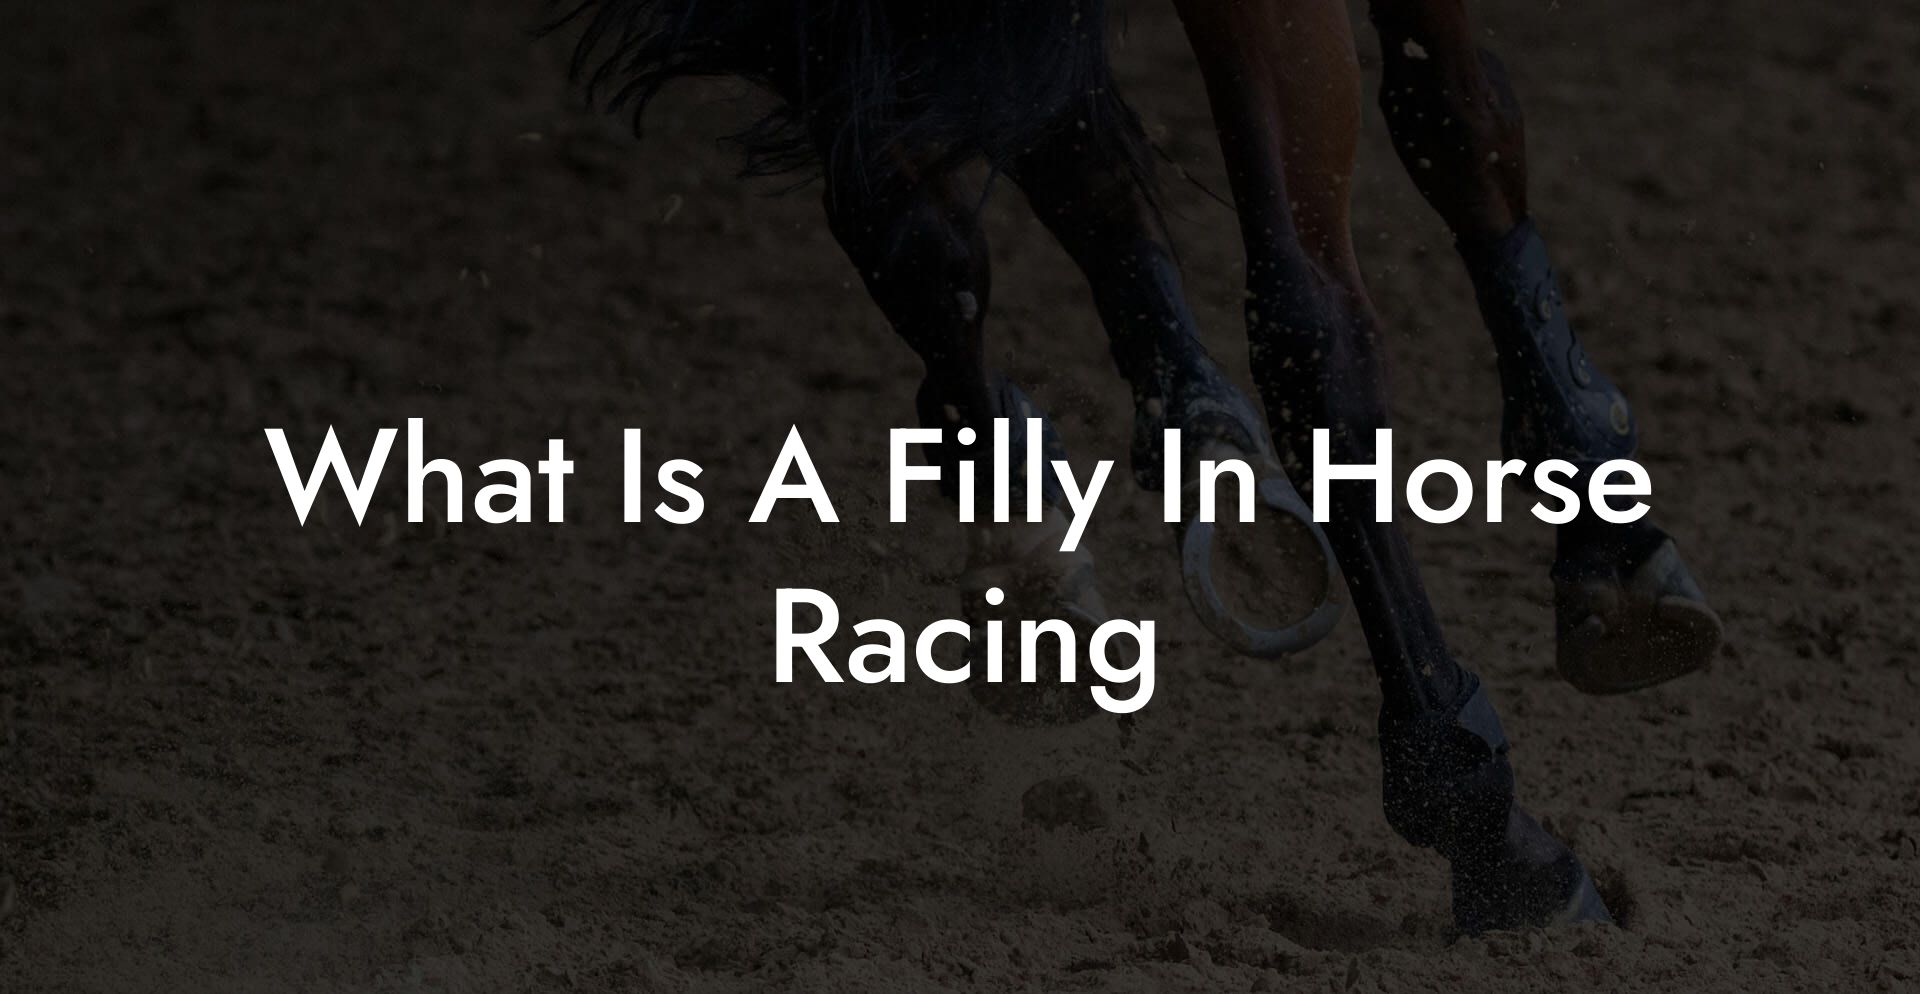 What Is A Filly In Horse Racing